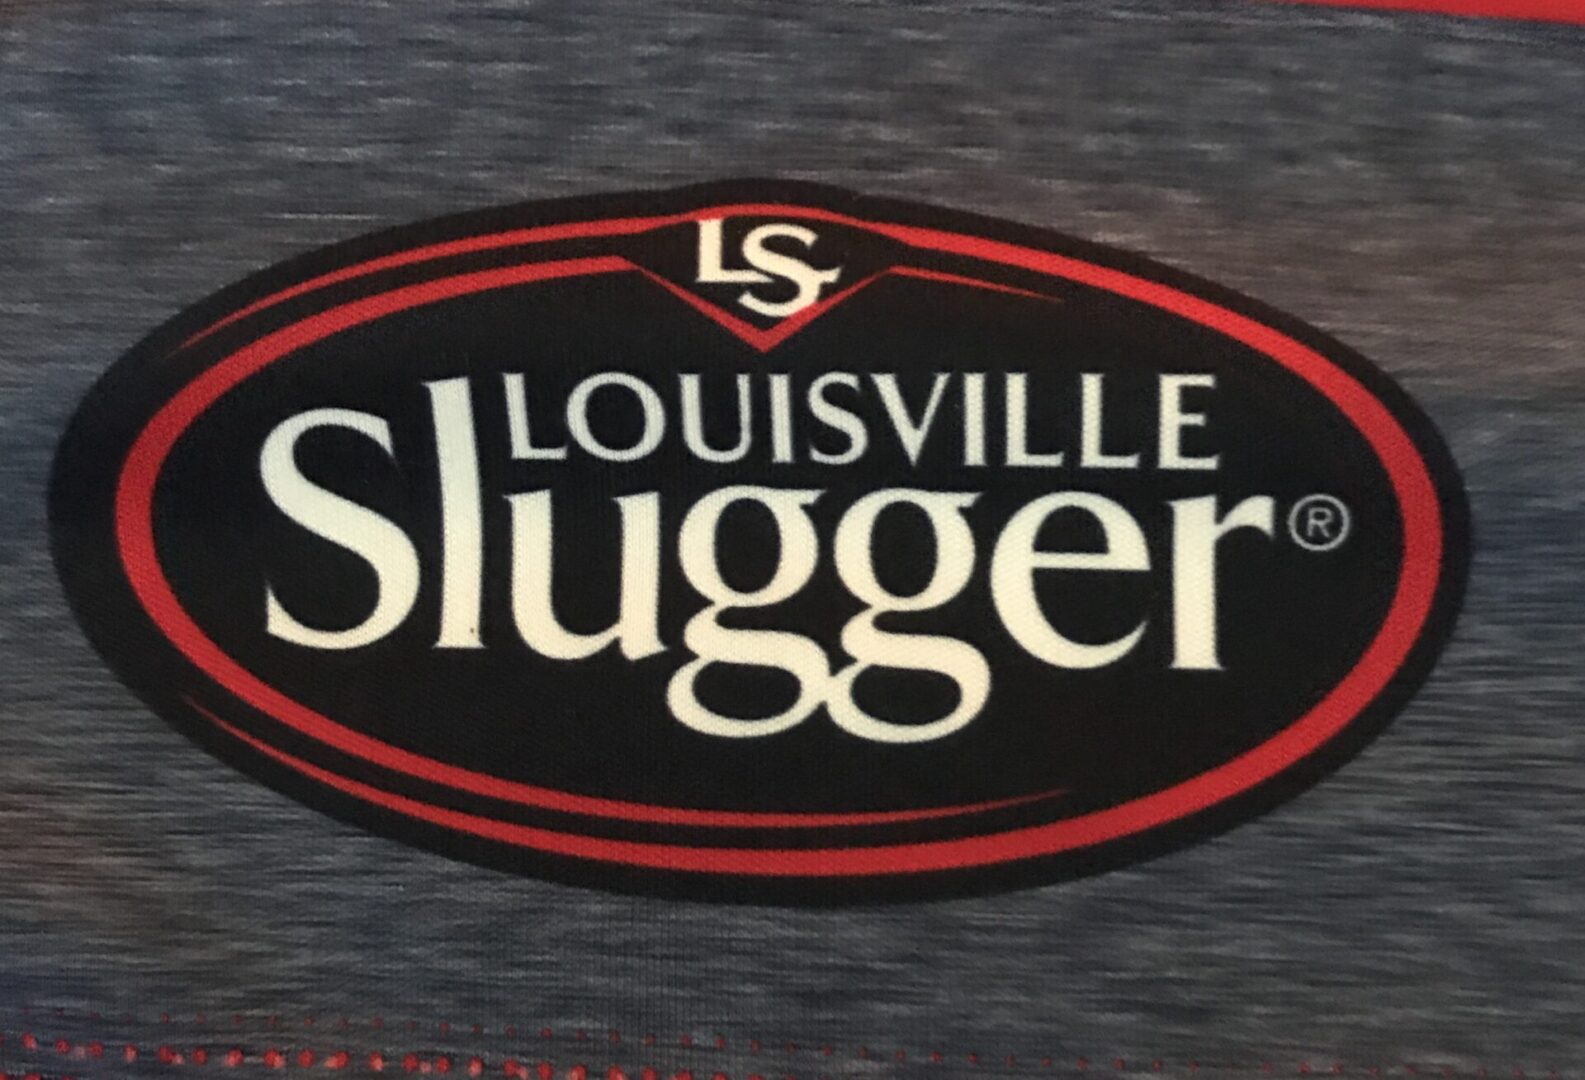 Louisville Slugger Logo in White, Black and Red on a Shirt